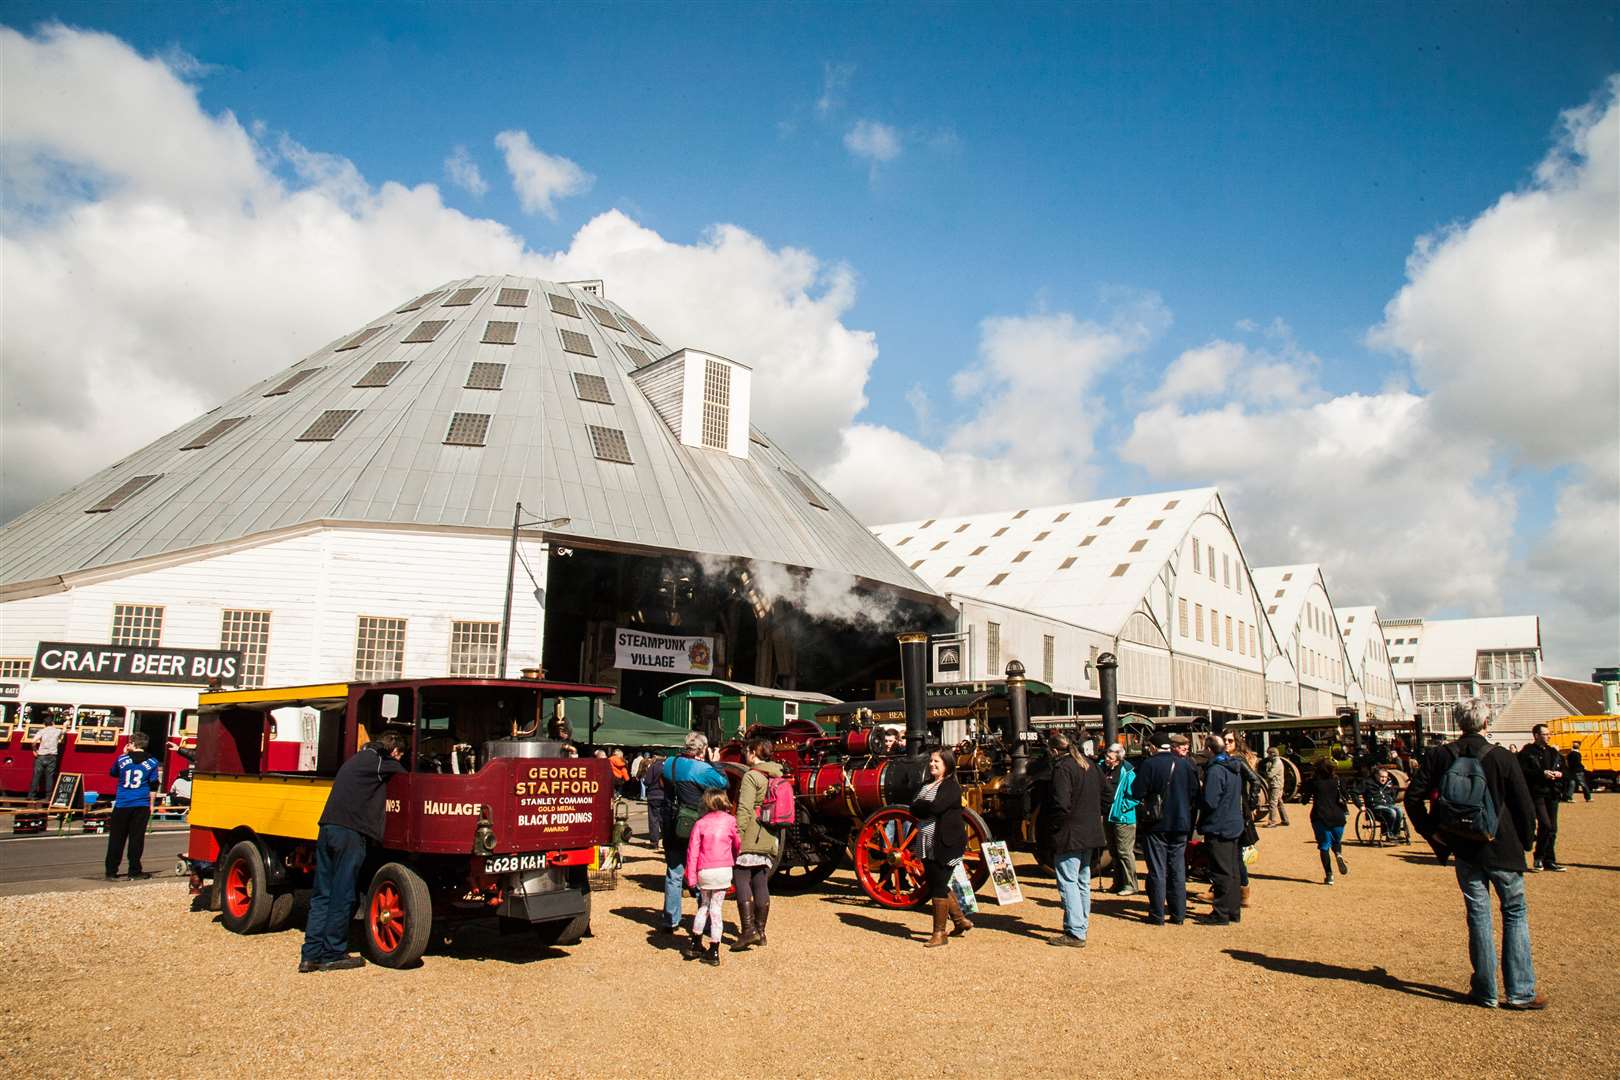 Wander around a traditional steam funfair at the Festival of Steam and Transport